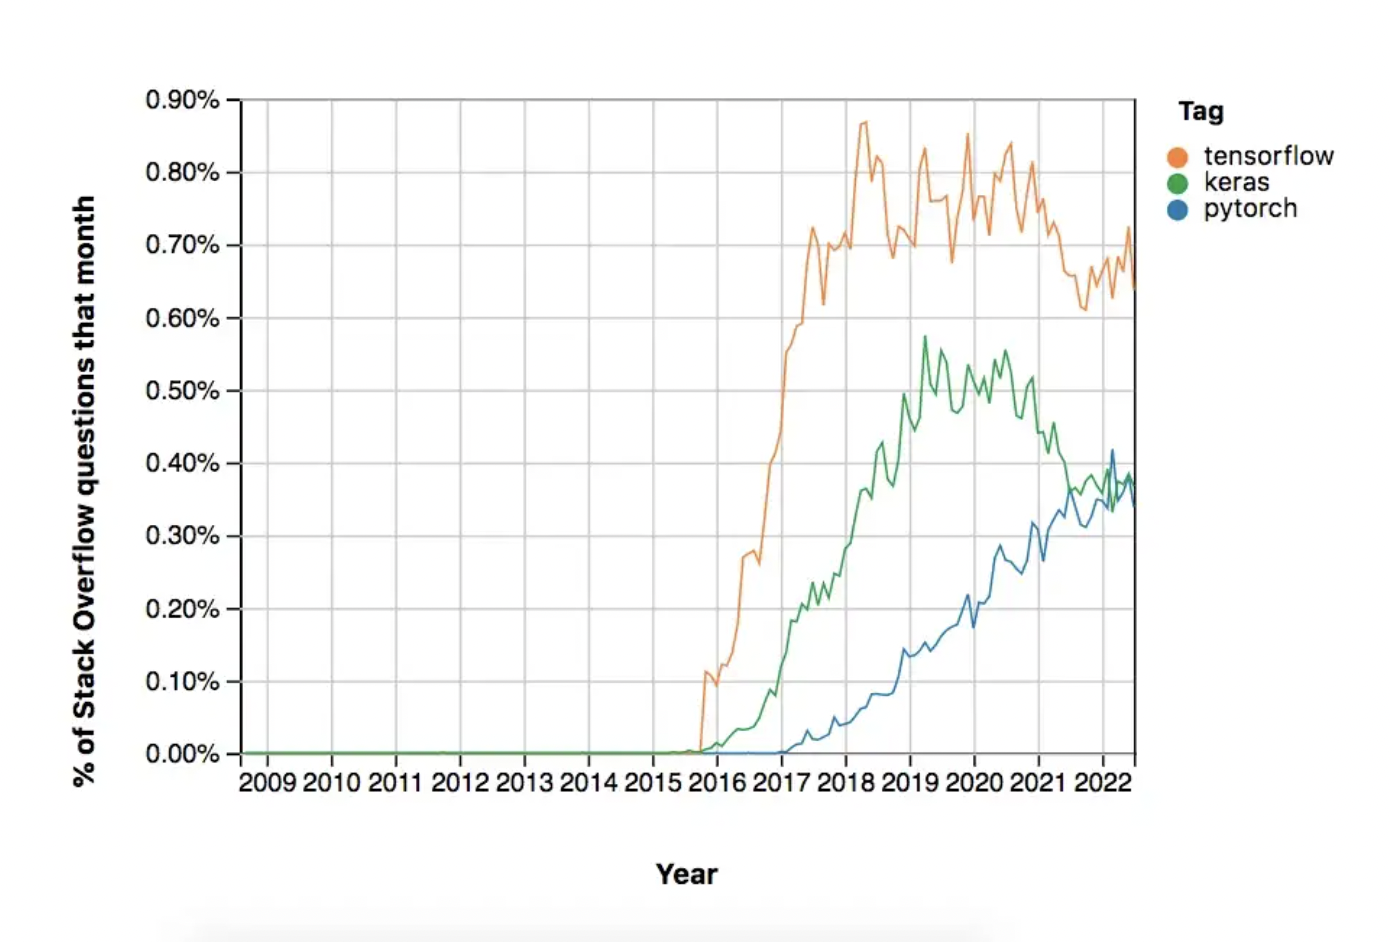 Graph showing percentage of StackOverflow labeled TensorFlow, Keras, and PyTorch over time